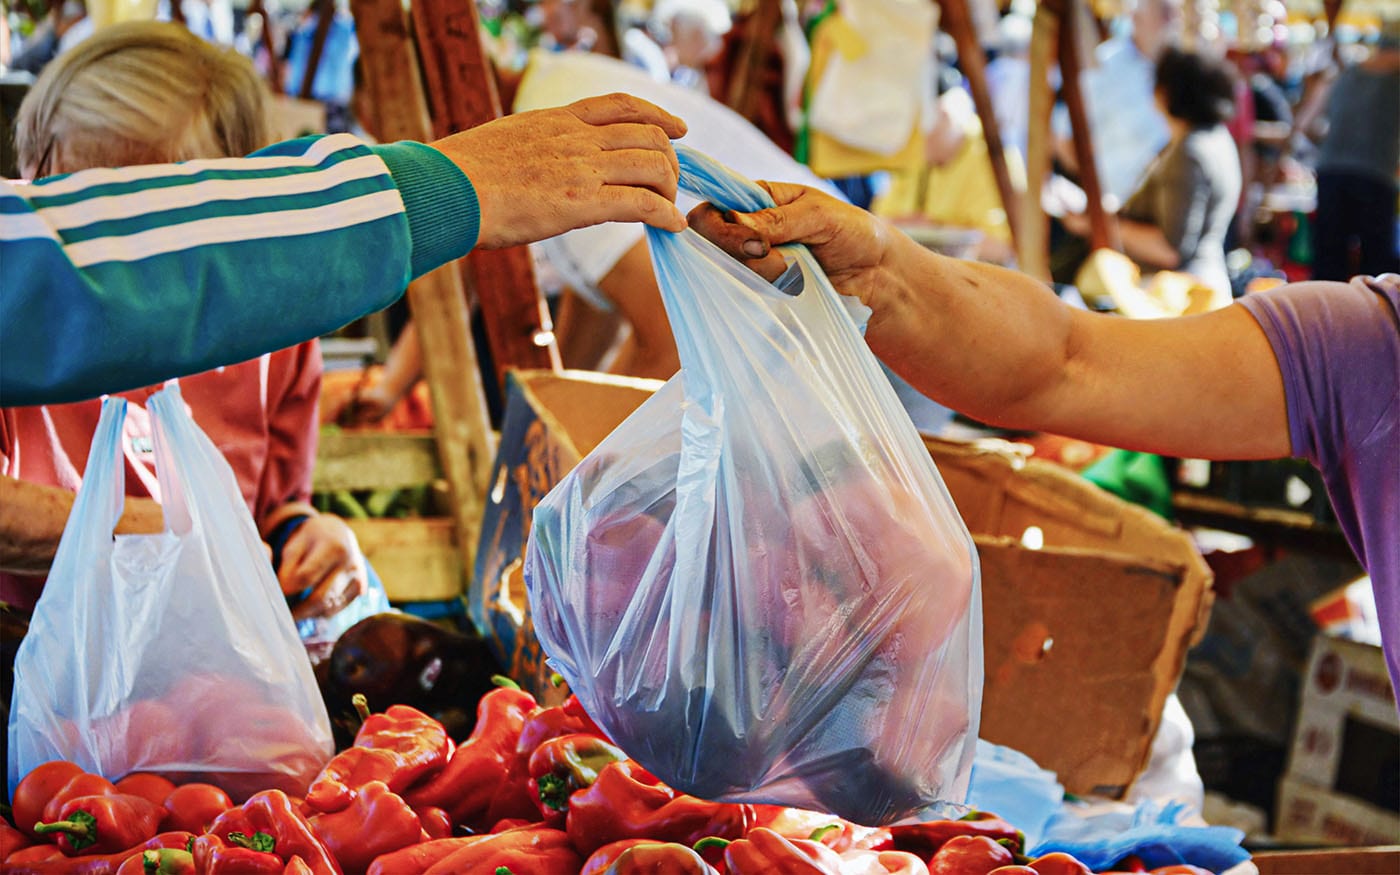 In a busy outdoor market, one person takes a plastic bag full of fruits and vegetables from the seller.